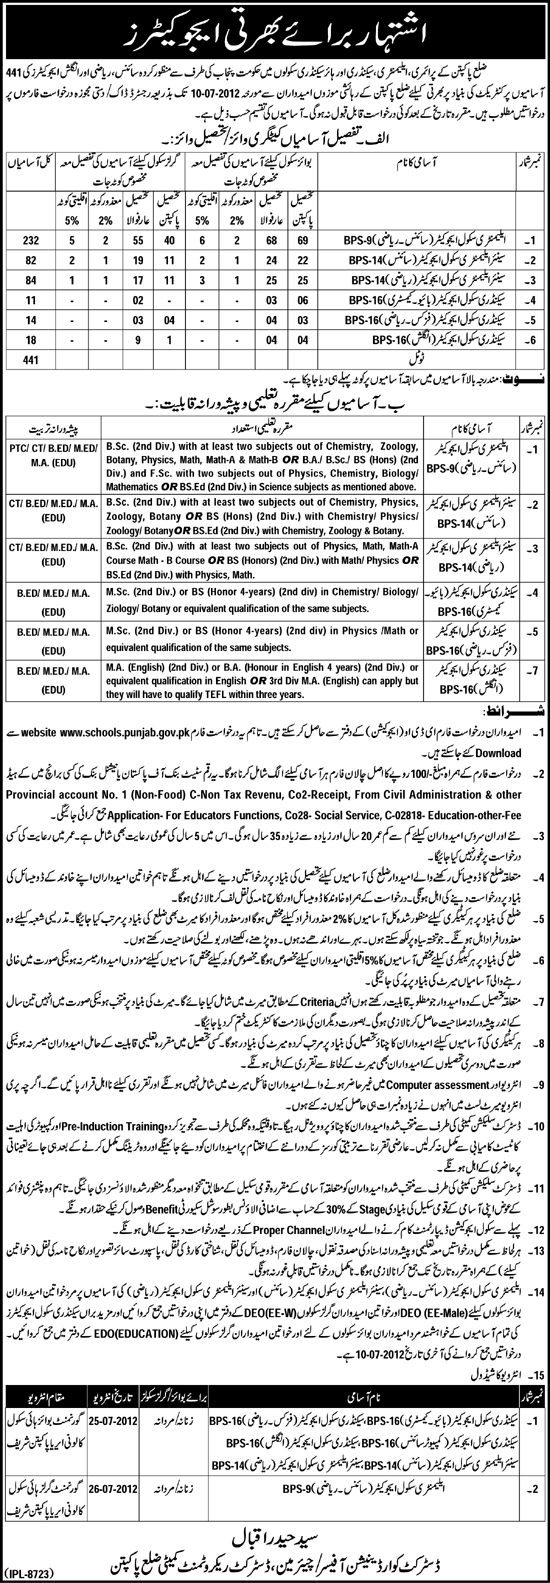 Teachers/Educators Required by Government of Punjab at Primary, Elementary, Secondary and Higher Secondary Schools (Pakpatan District) (441 Vacancies) (Govt. Job)